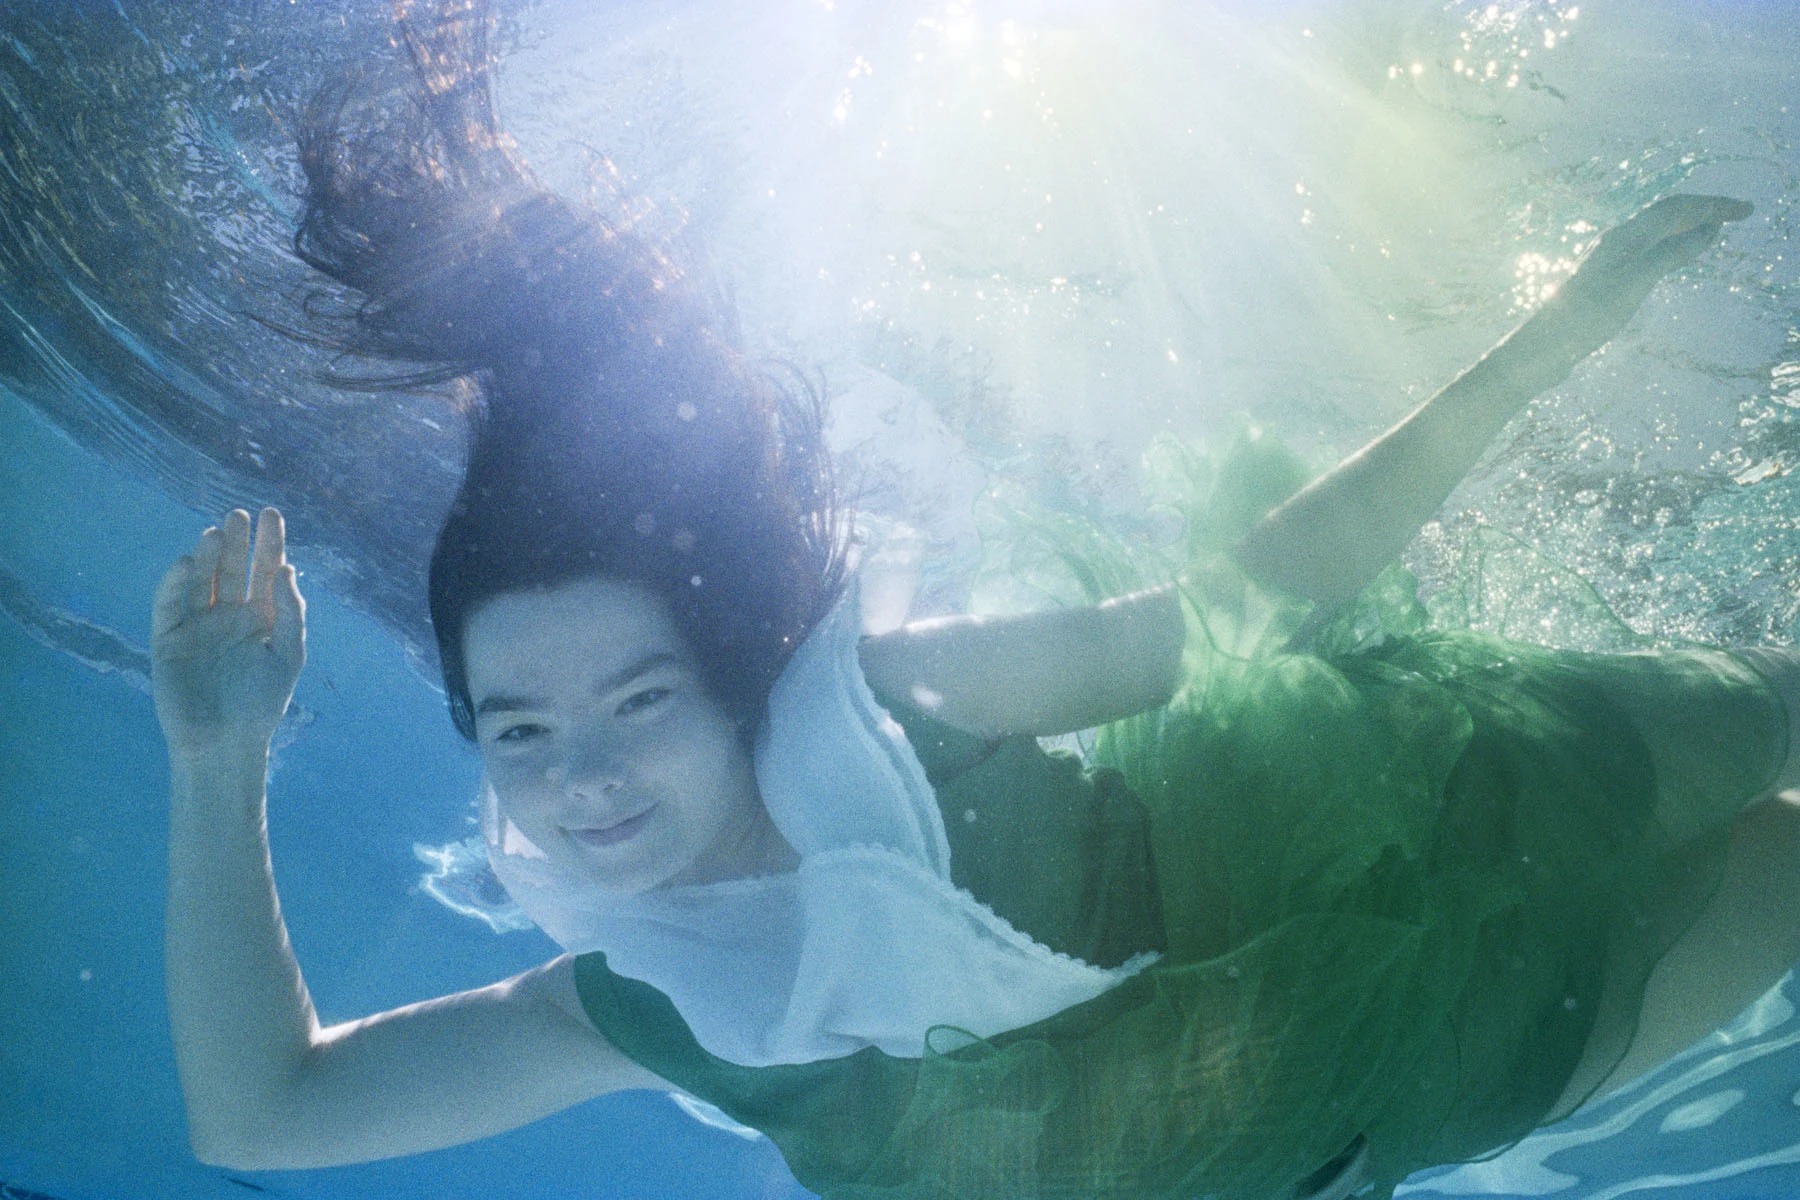 Photograph of the musician Björk, a young, dark-haired woman wearing a green dress. She is shown beneath the deep blue surface of a swimming pool, pictured from below, waving at the camera and smiling. The sun’s rays are lighting the scene from above.